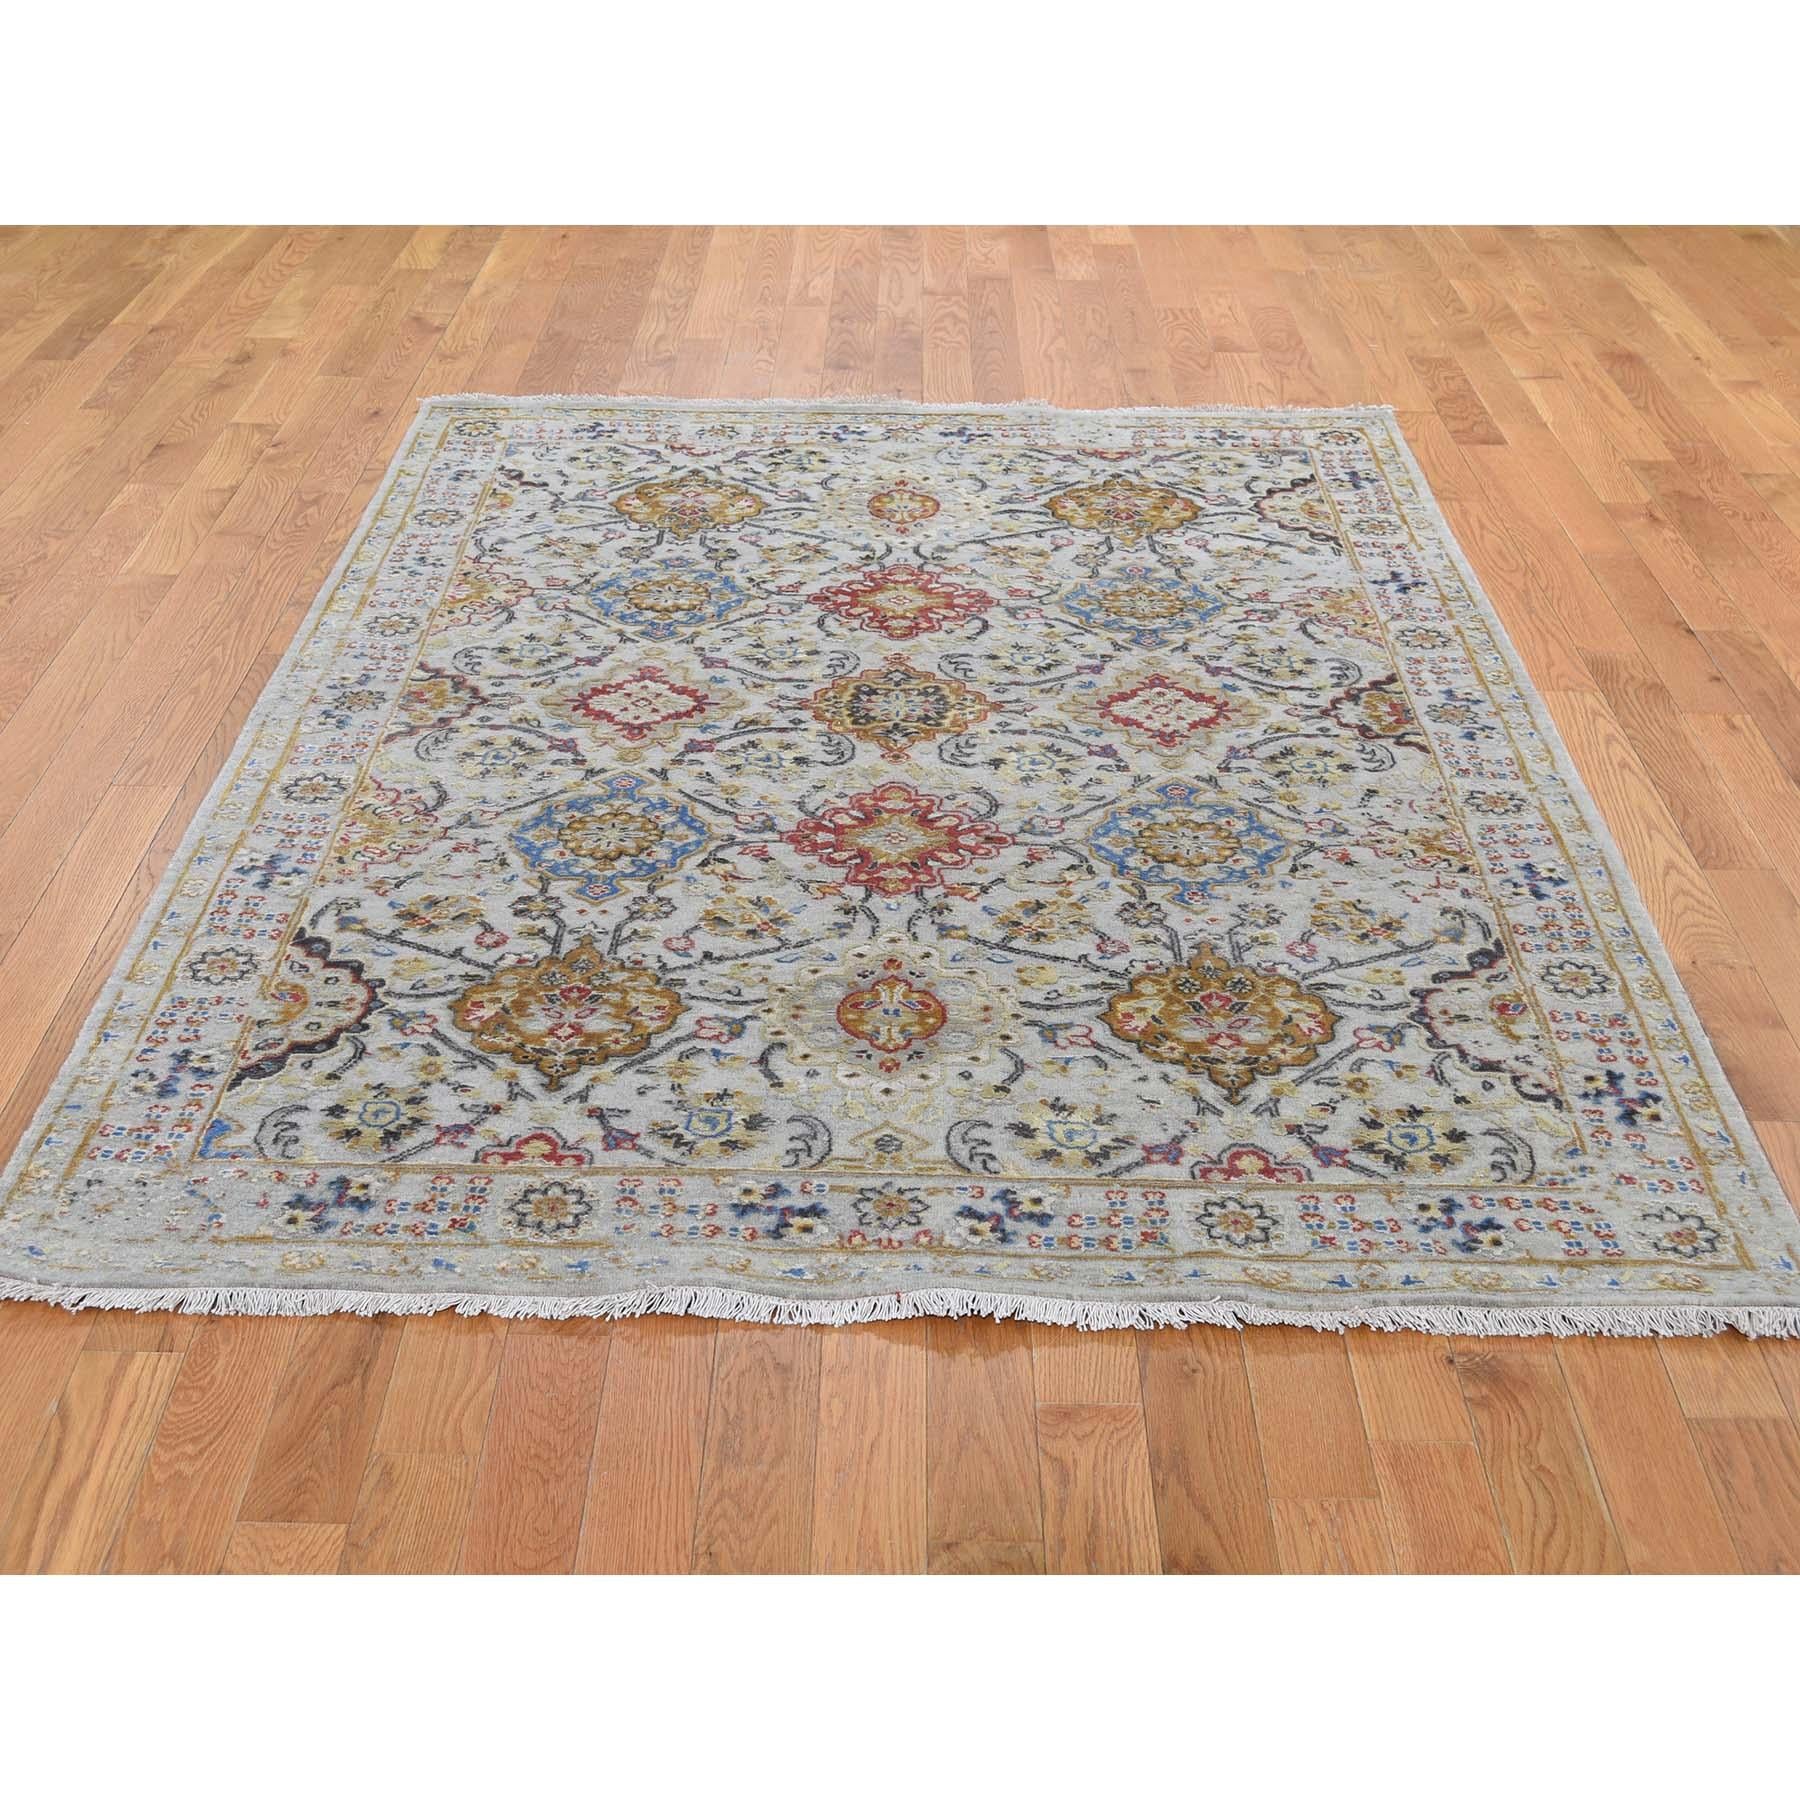 Other The Sunset Rosettes Pure Silk and Wool Hand-Knotted Oriental Rug